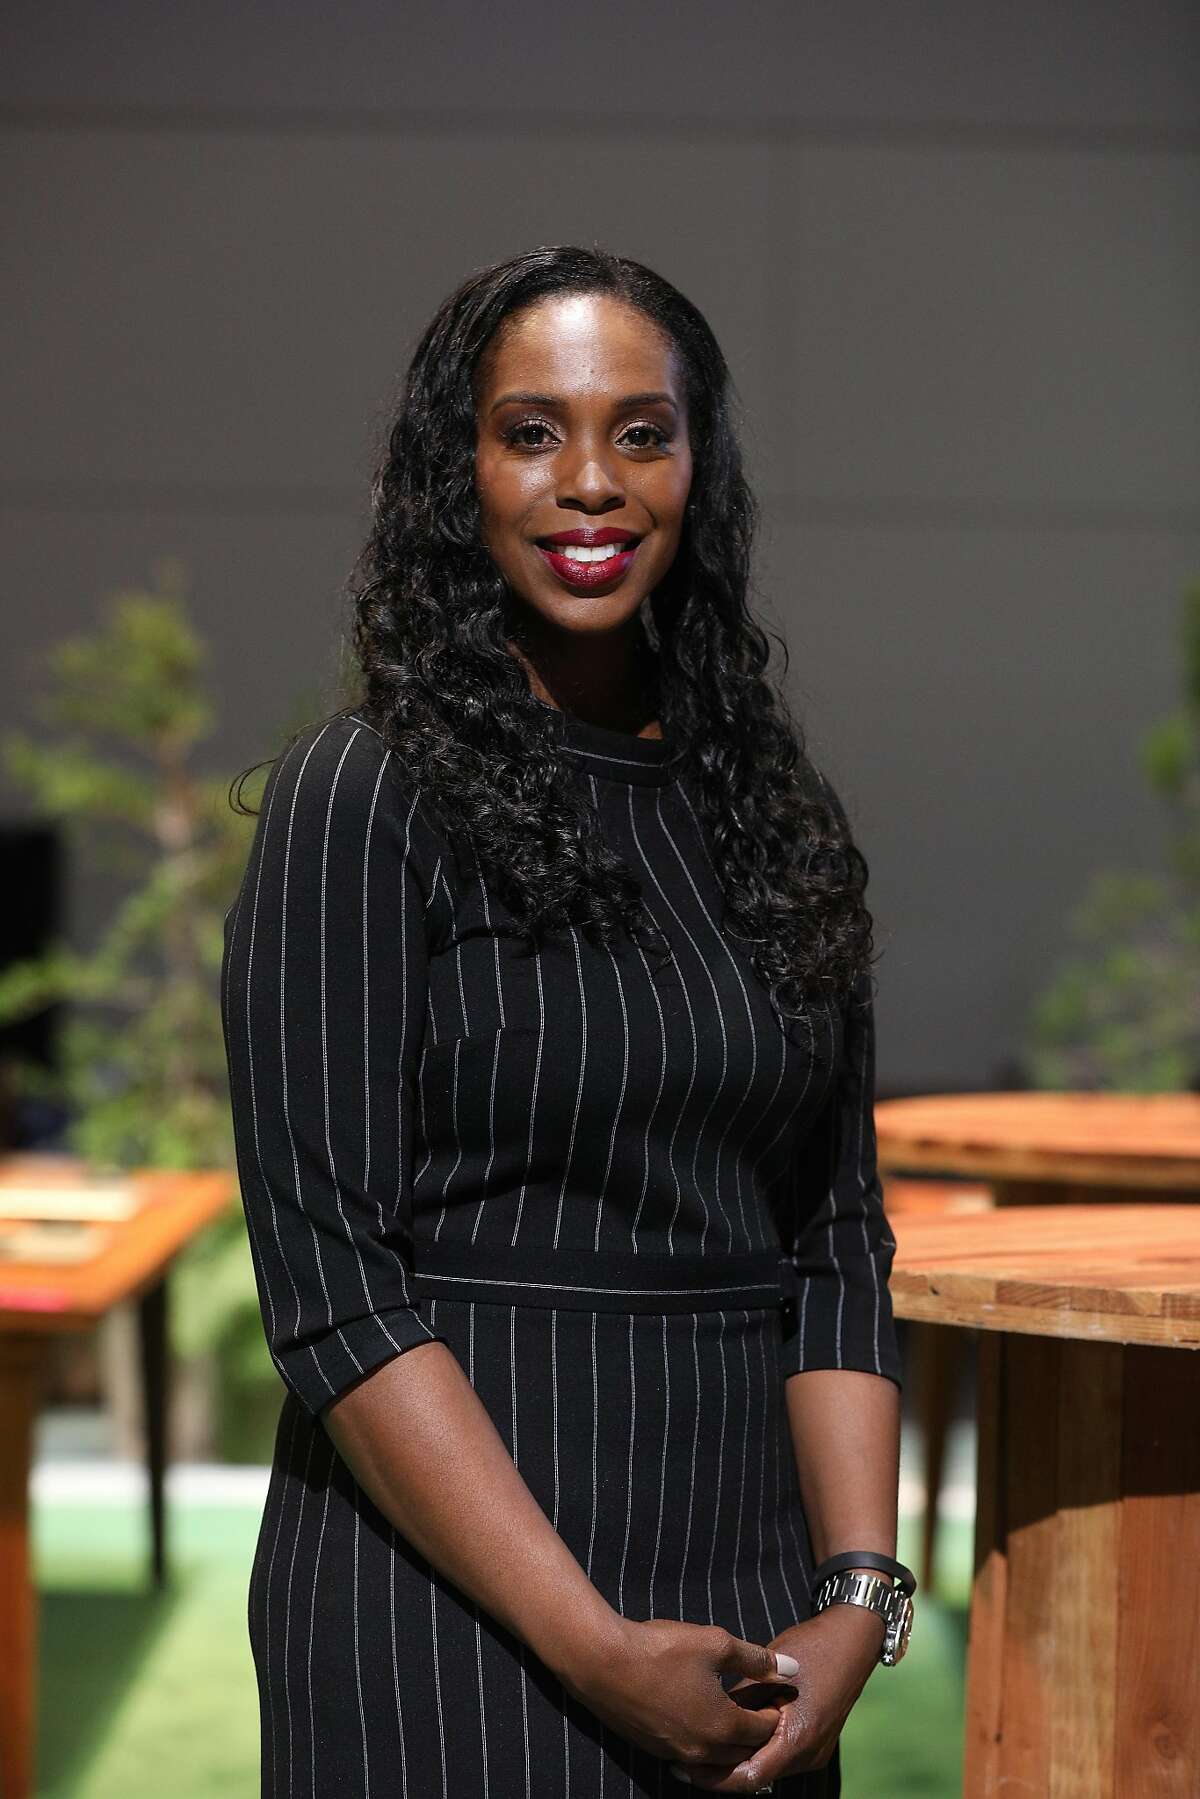 Ebony Frelix, Salesforce.org chief philanthropy officer, stands for a portrait at Dreamforce 2018 on Monday, September 24, 2018 in San Francisco, Calif.